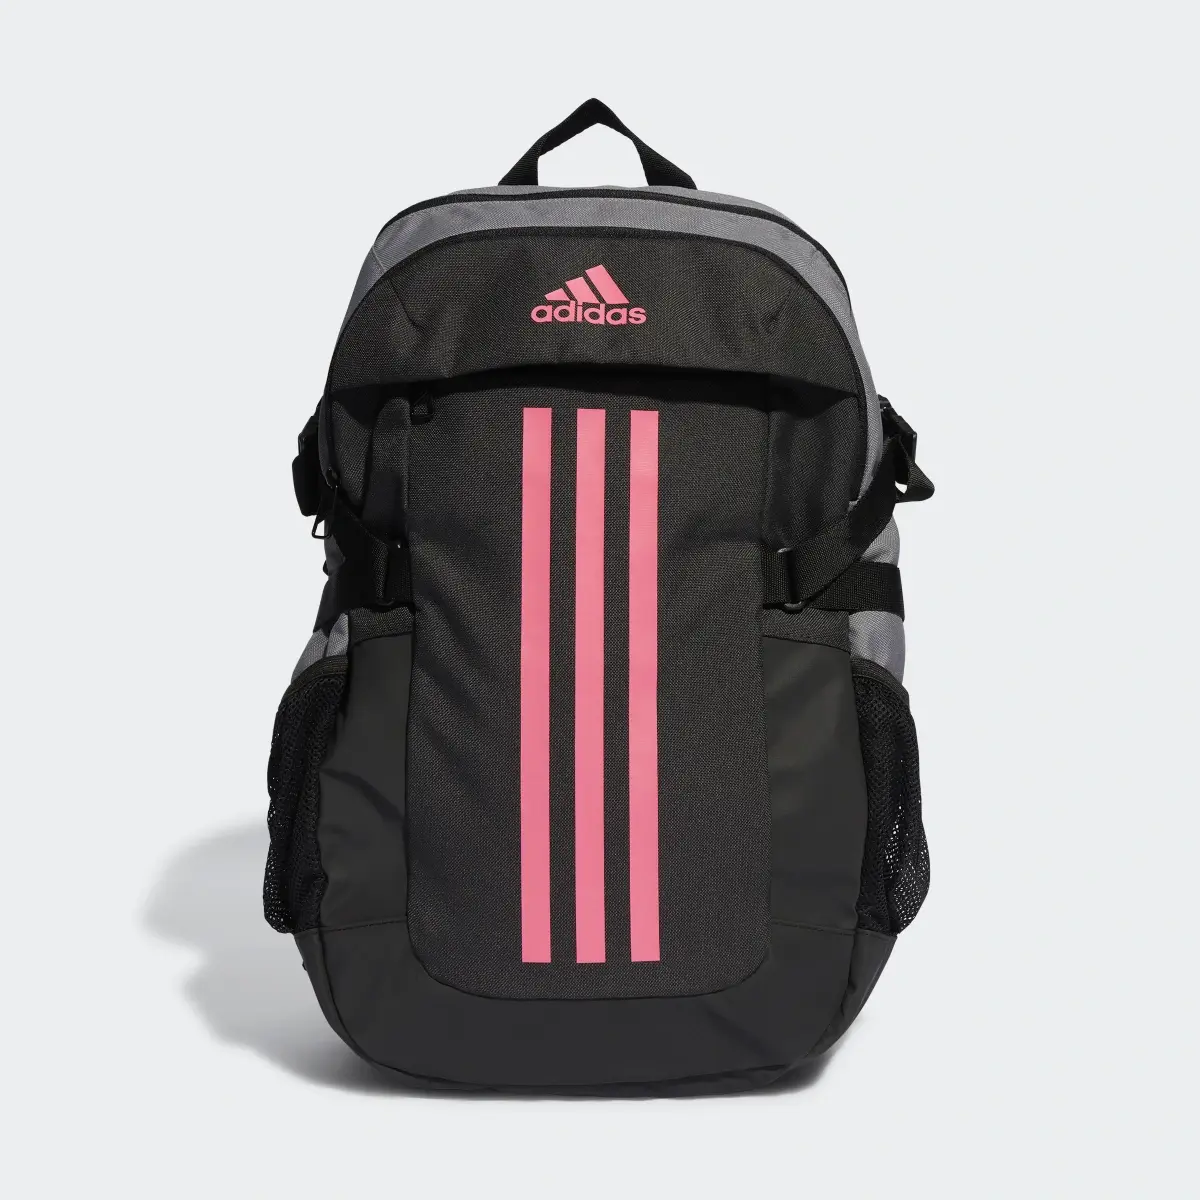 Adidas Power Backpack. 2